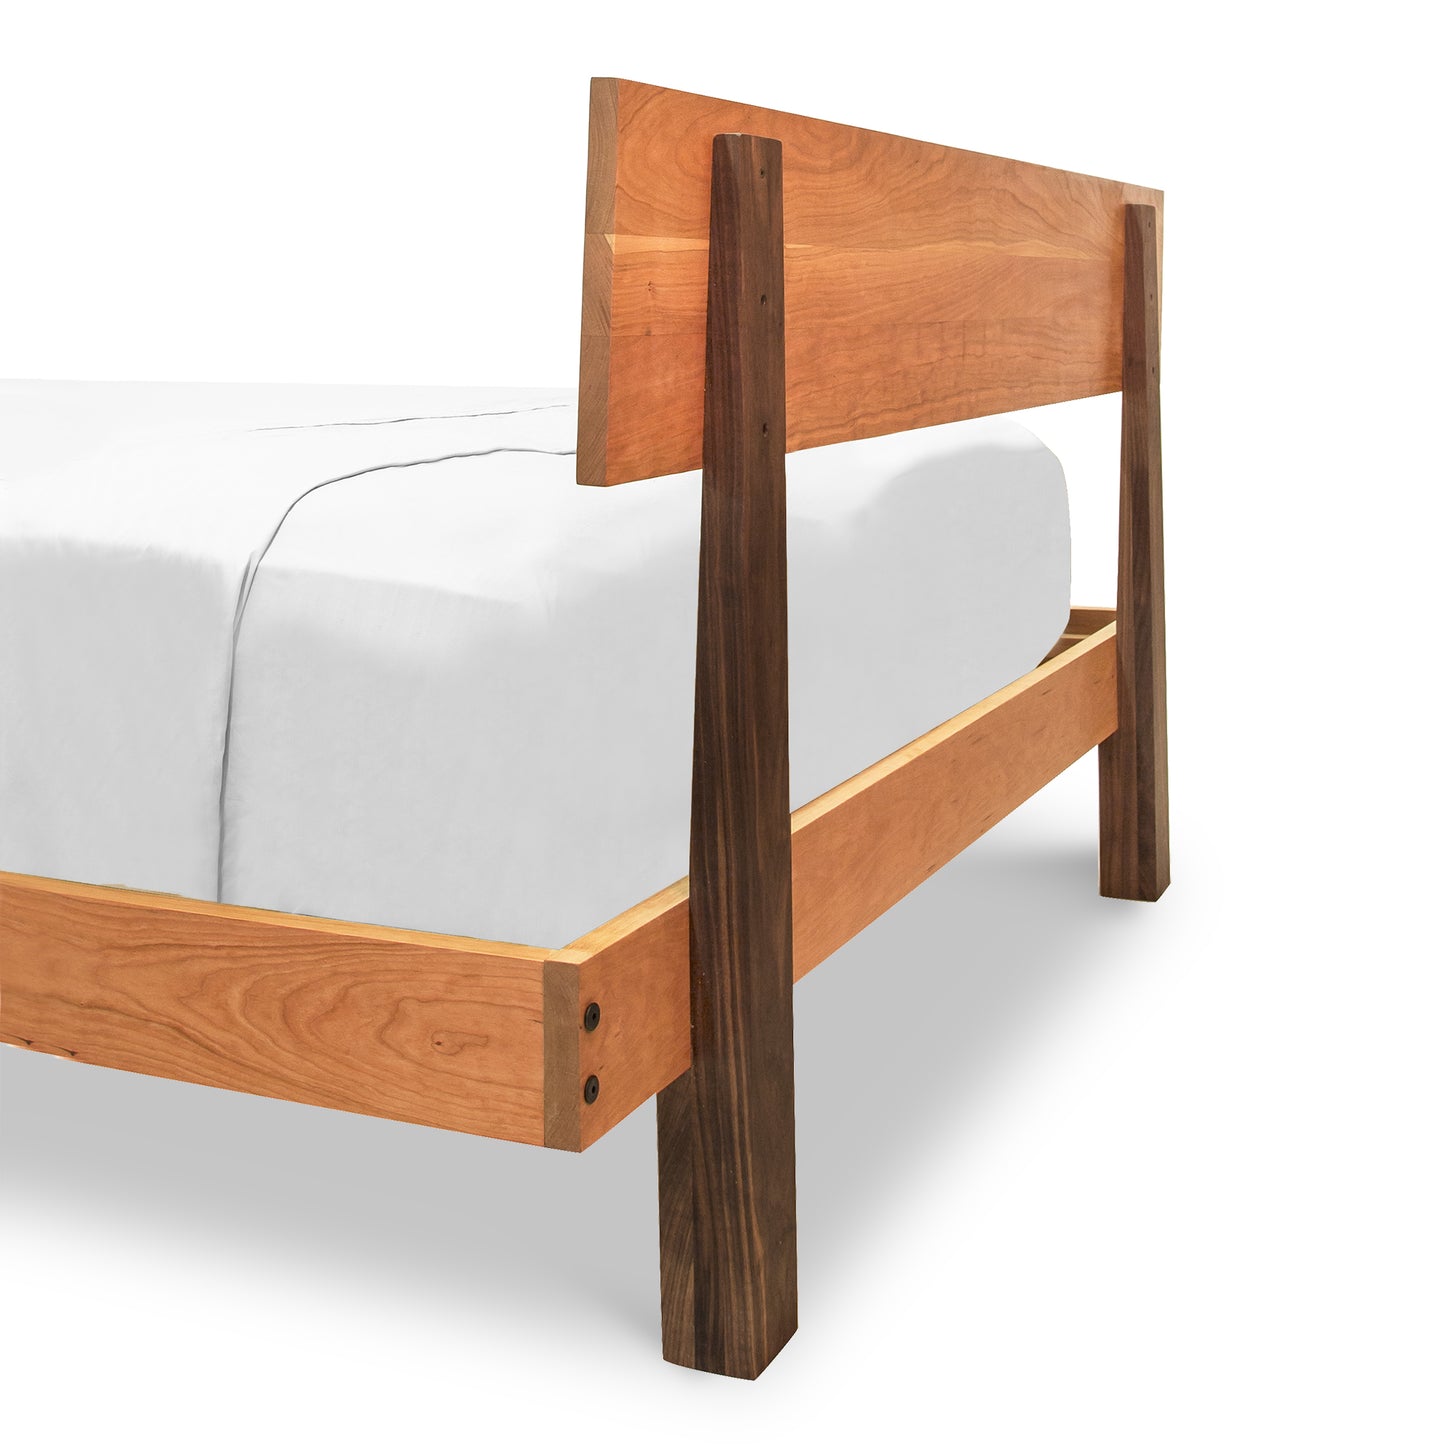 A Vermont Furniture Designs Modern American Platform Bed frame made of solid hardwoods with a white mattress, isolated on a white background.